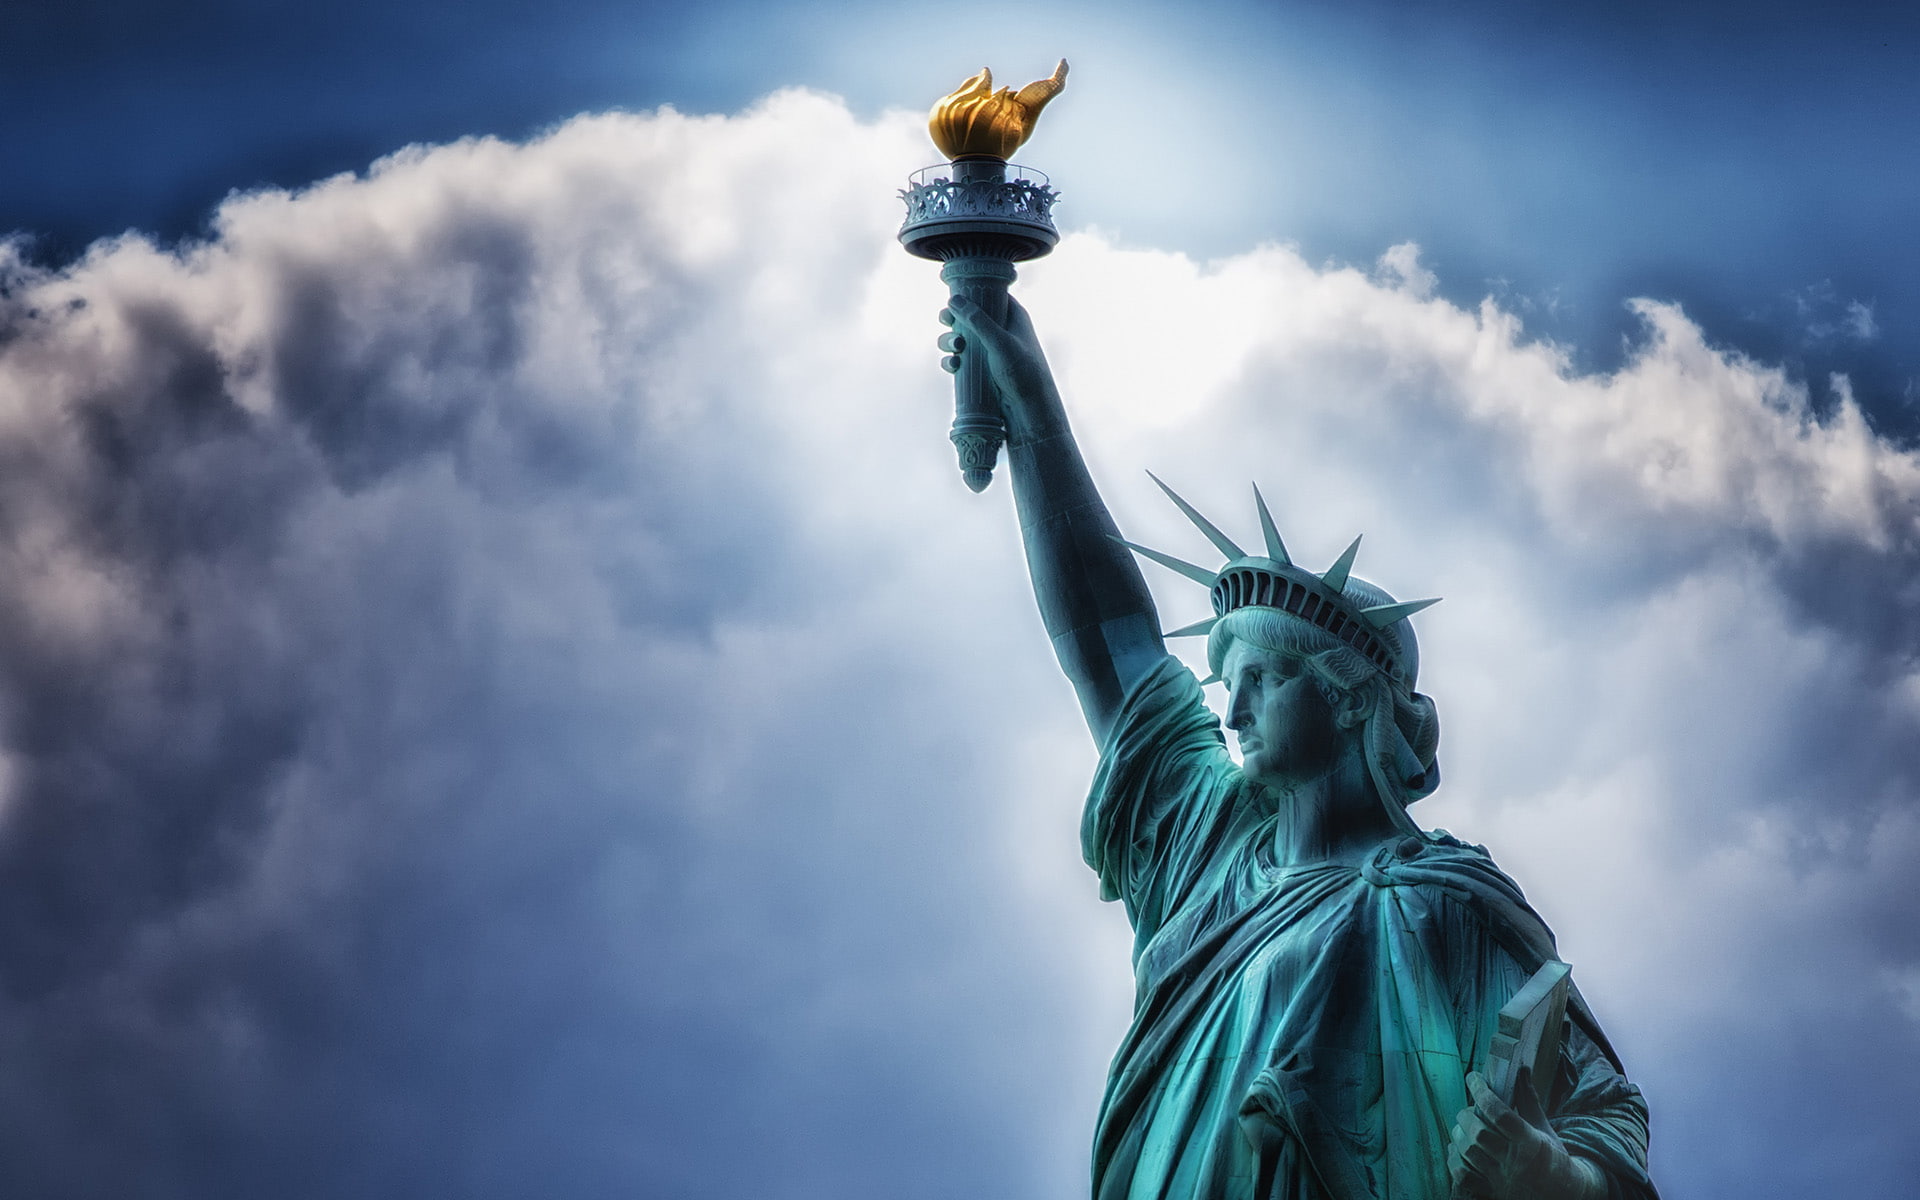 Statue Of Liberty, Was Officially Unveiled On October 28, 1886 With Time The Statue Became A Symbol Of The City, And Tpodocna And The Whole Country Wallpaper Hd